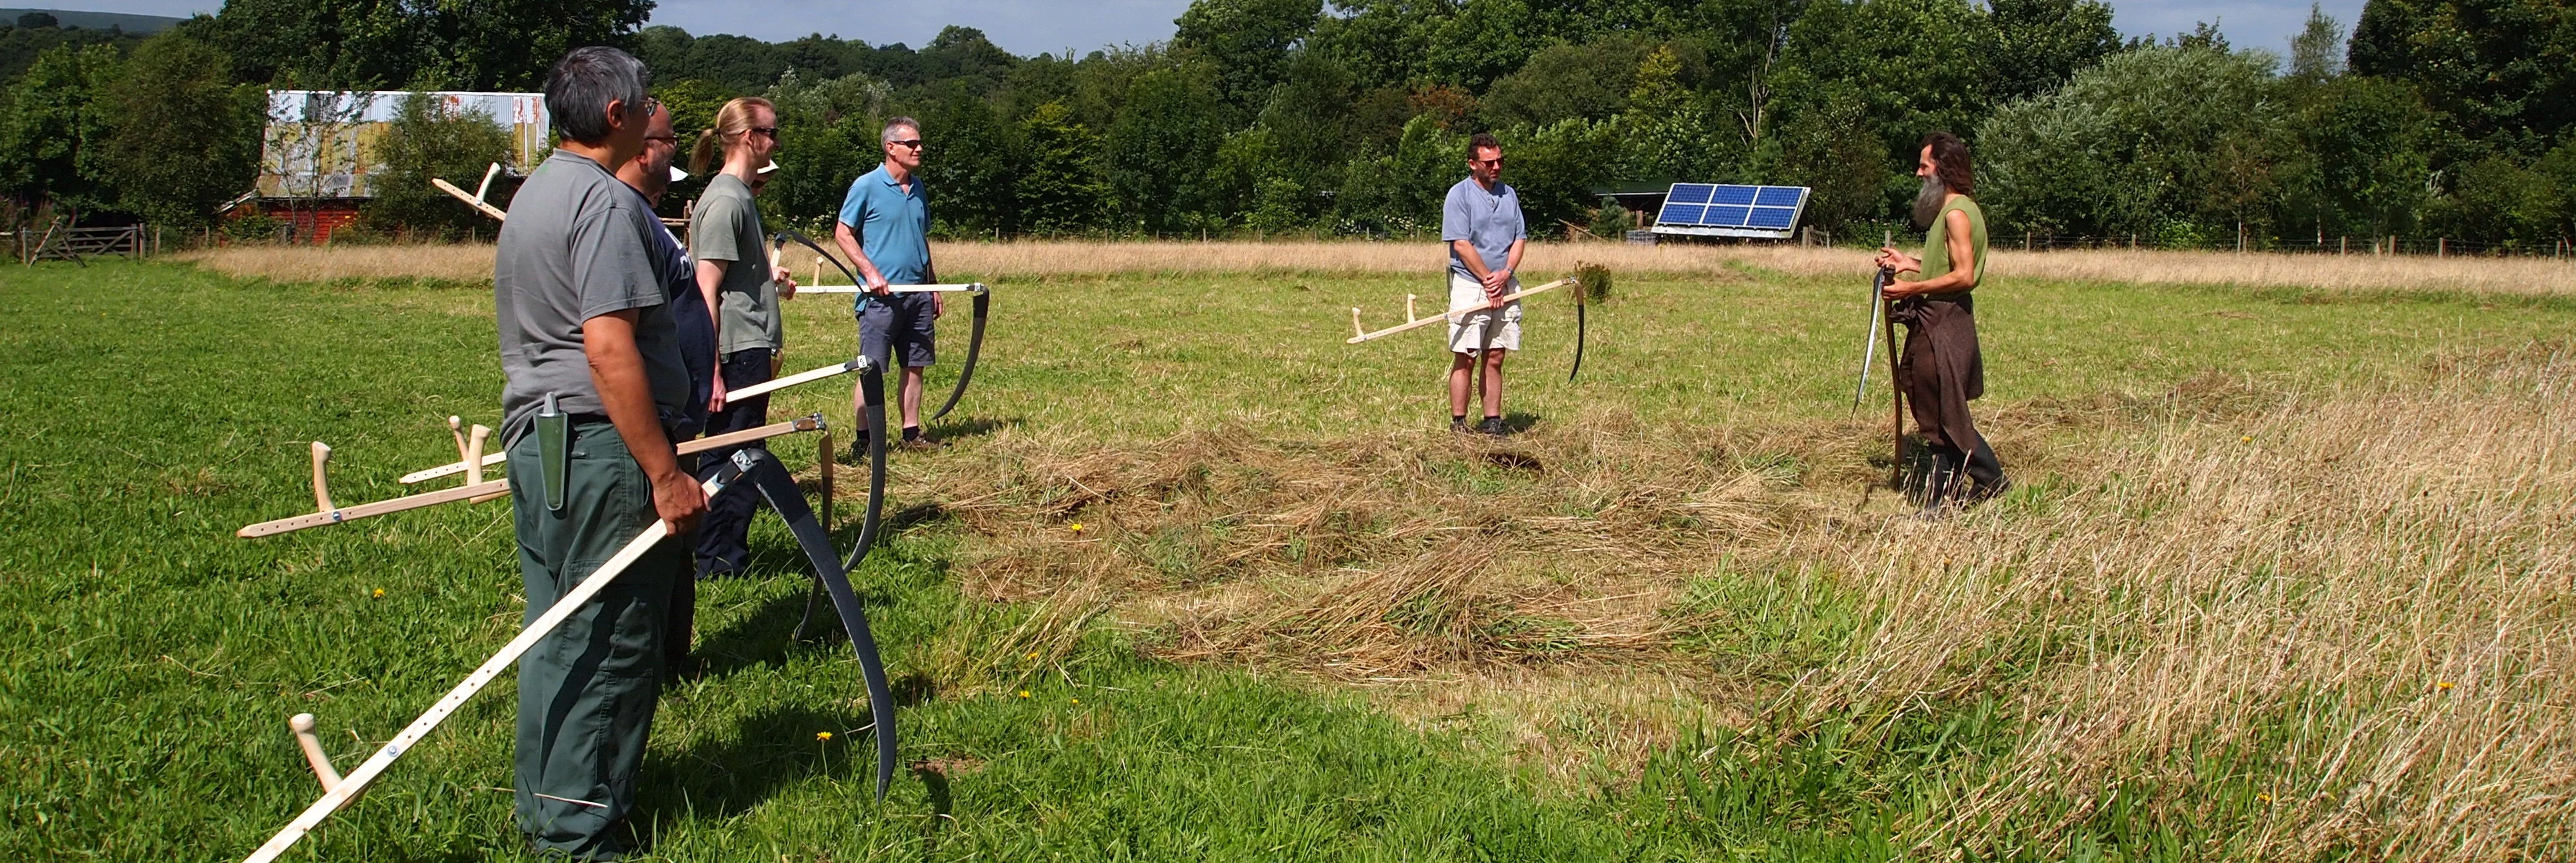 Learning to Scythe in the Hay Meadow